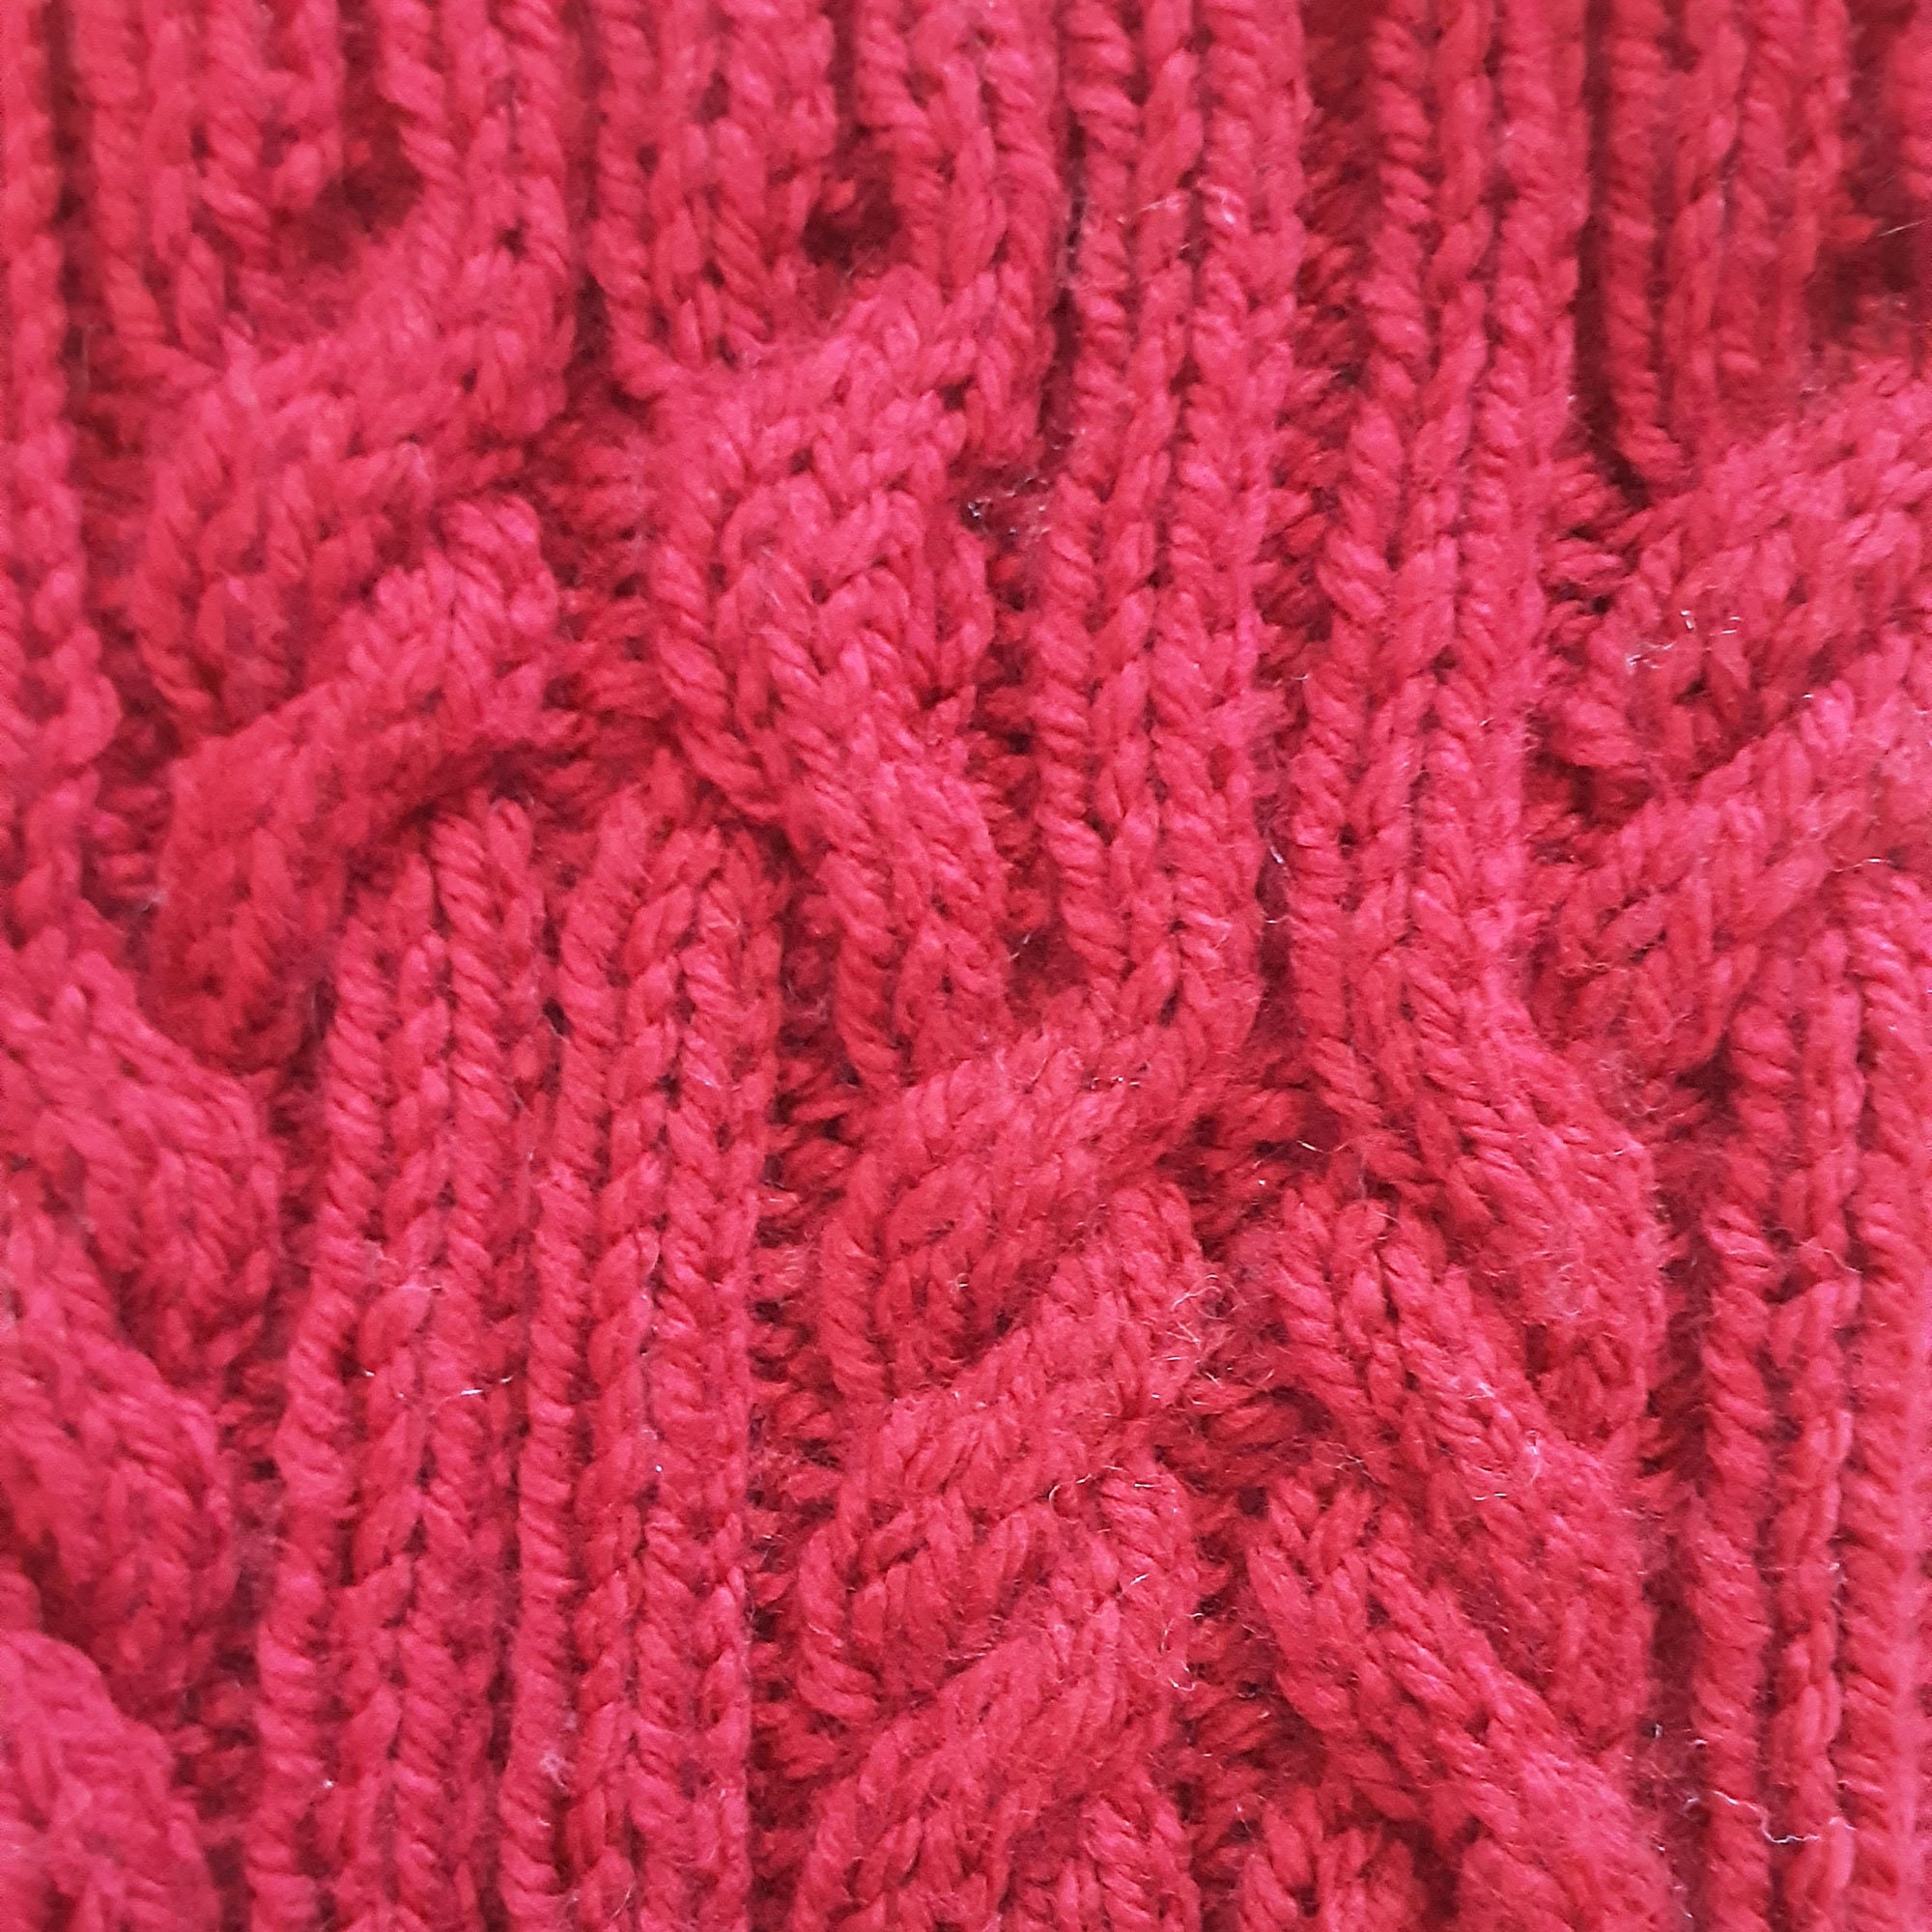 Cowl Knitting Pattern Cabled Cowl Knit Pattern Pdf - Etsy